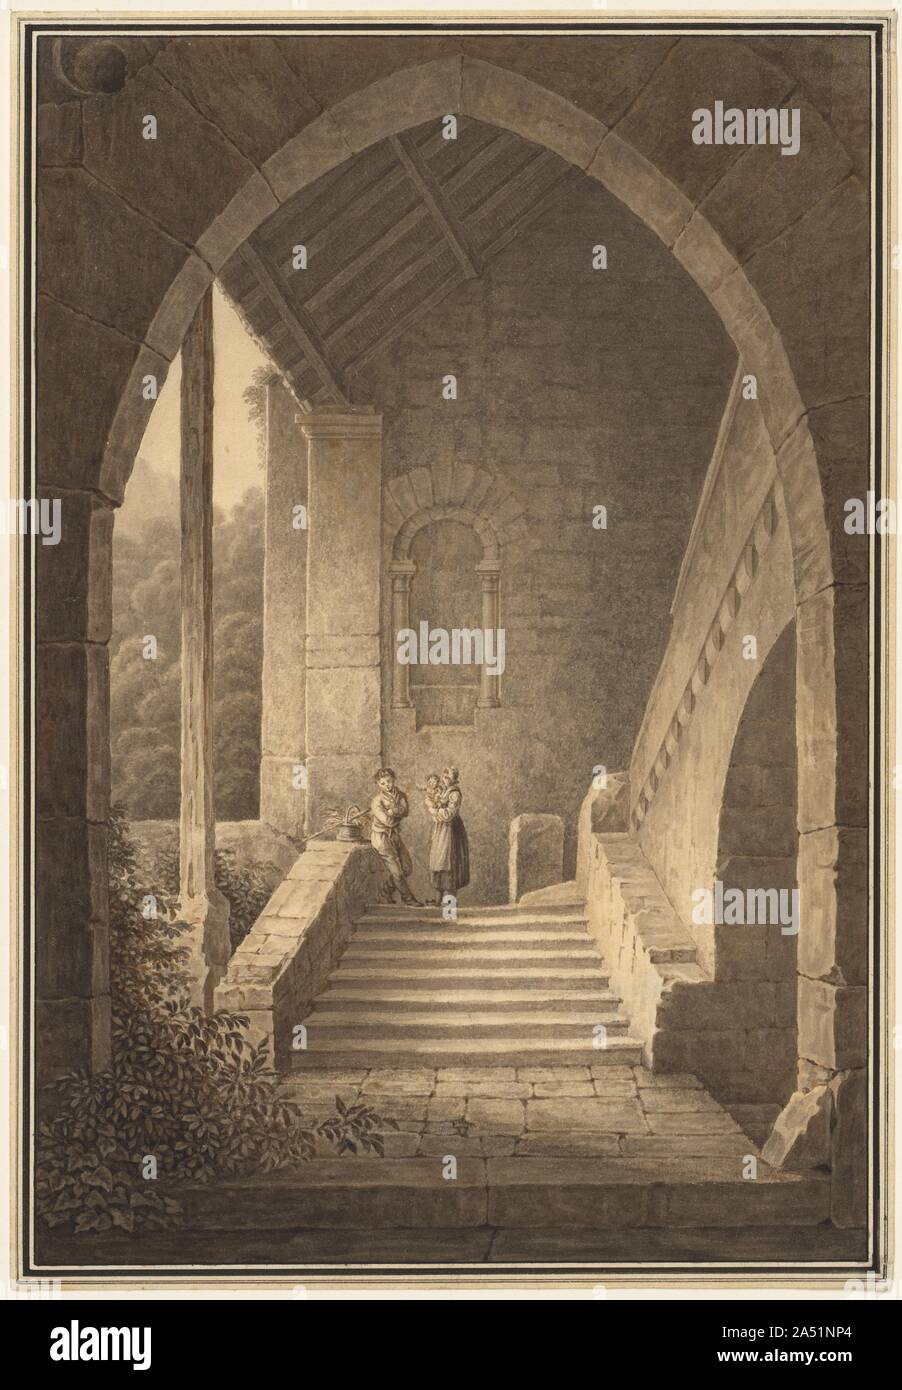 Outer Staircase of a Gothic Ruin (Treppenaufgang einer gotischen Ruine), 1830. Quaglio was recognized as the finest German topographical painter of his generation, and he showed a special affinity for dramatic buildings of the Gothic period. In this watercolour, a young family pauses in the archway of what appears to be a ruined Gothic church. Ivy encroaches upon the stairs, and a dense forest may be seen in the distance. Views of ruined churches juxtaposed by untamed nature frequently appeared in the landscapes of German Romantic artists who believed that nature signified the presence of God. Stock Photo